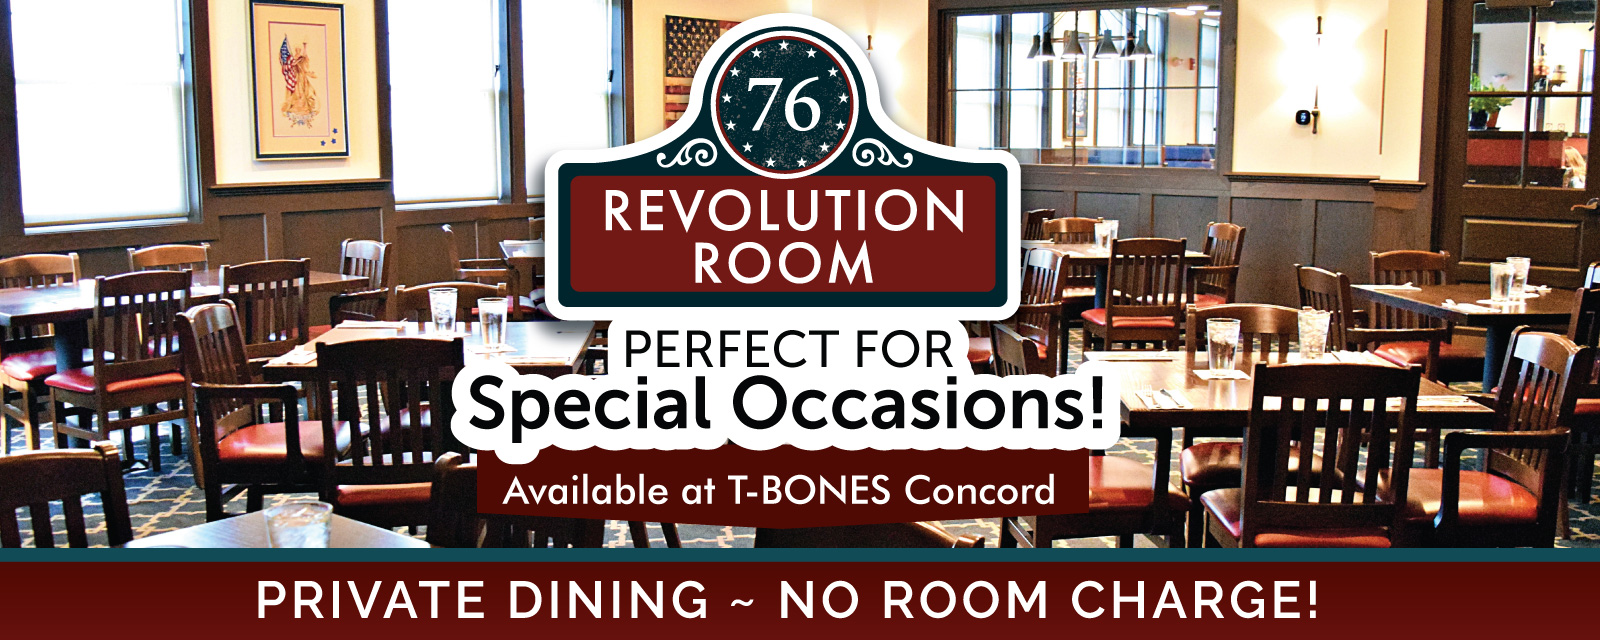 Private Dining available at our T-BONES Concord location only.